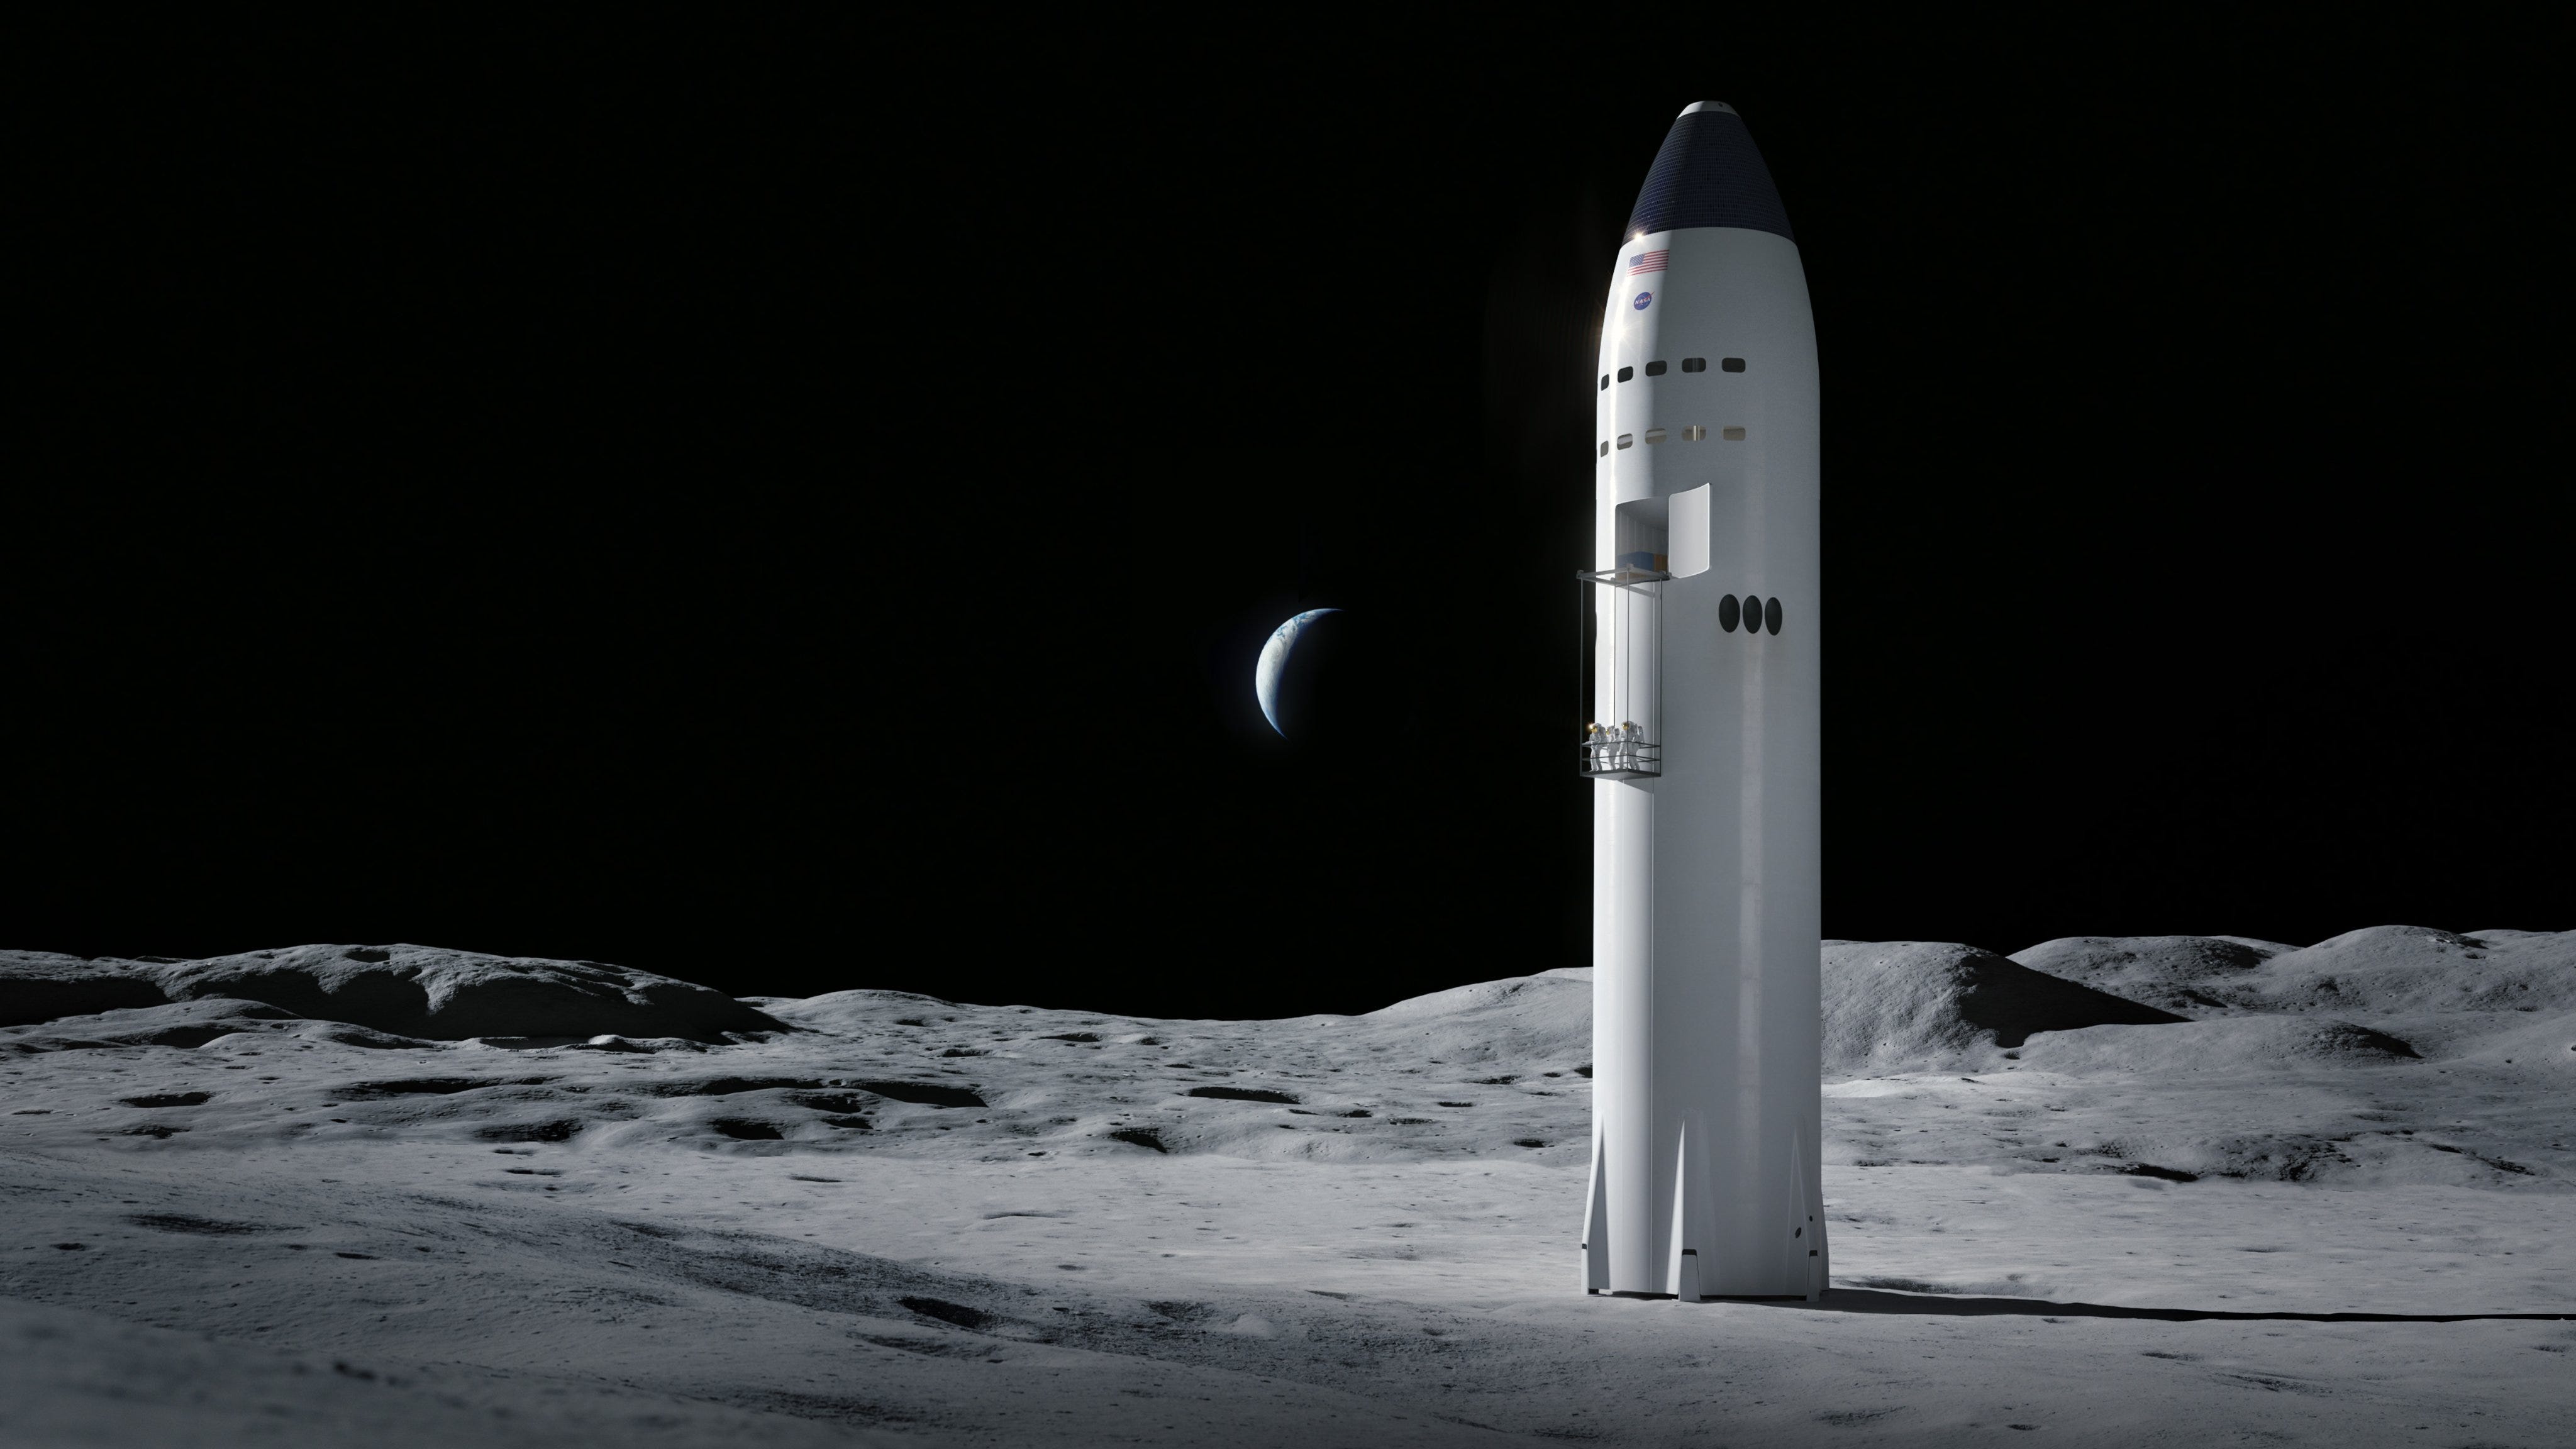 SpaceX's human lander design is a single-stage solution with Starship, a fully reusable launch and landing system designed for travel to the moon, Mars, and beyond. SpaceX's proposal includes in-space propellent transfer demonstration and an uncrewed test landing.